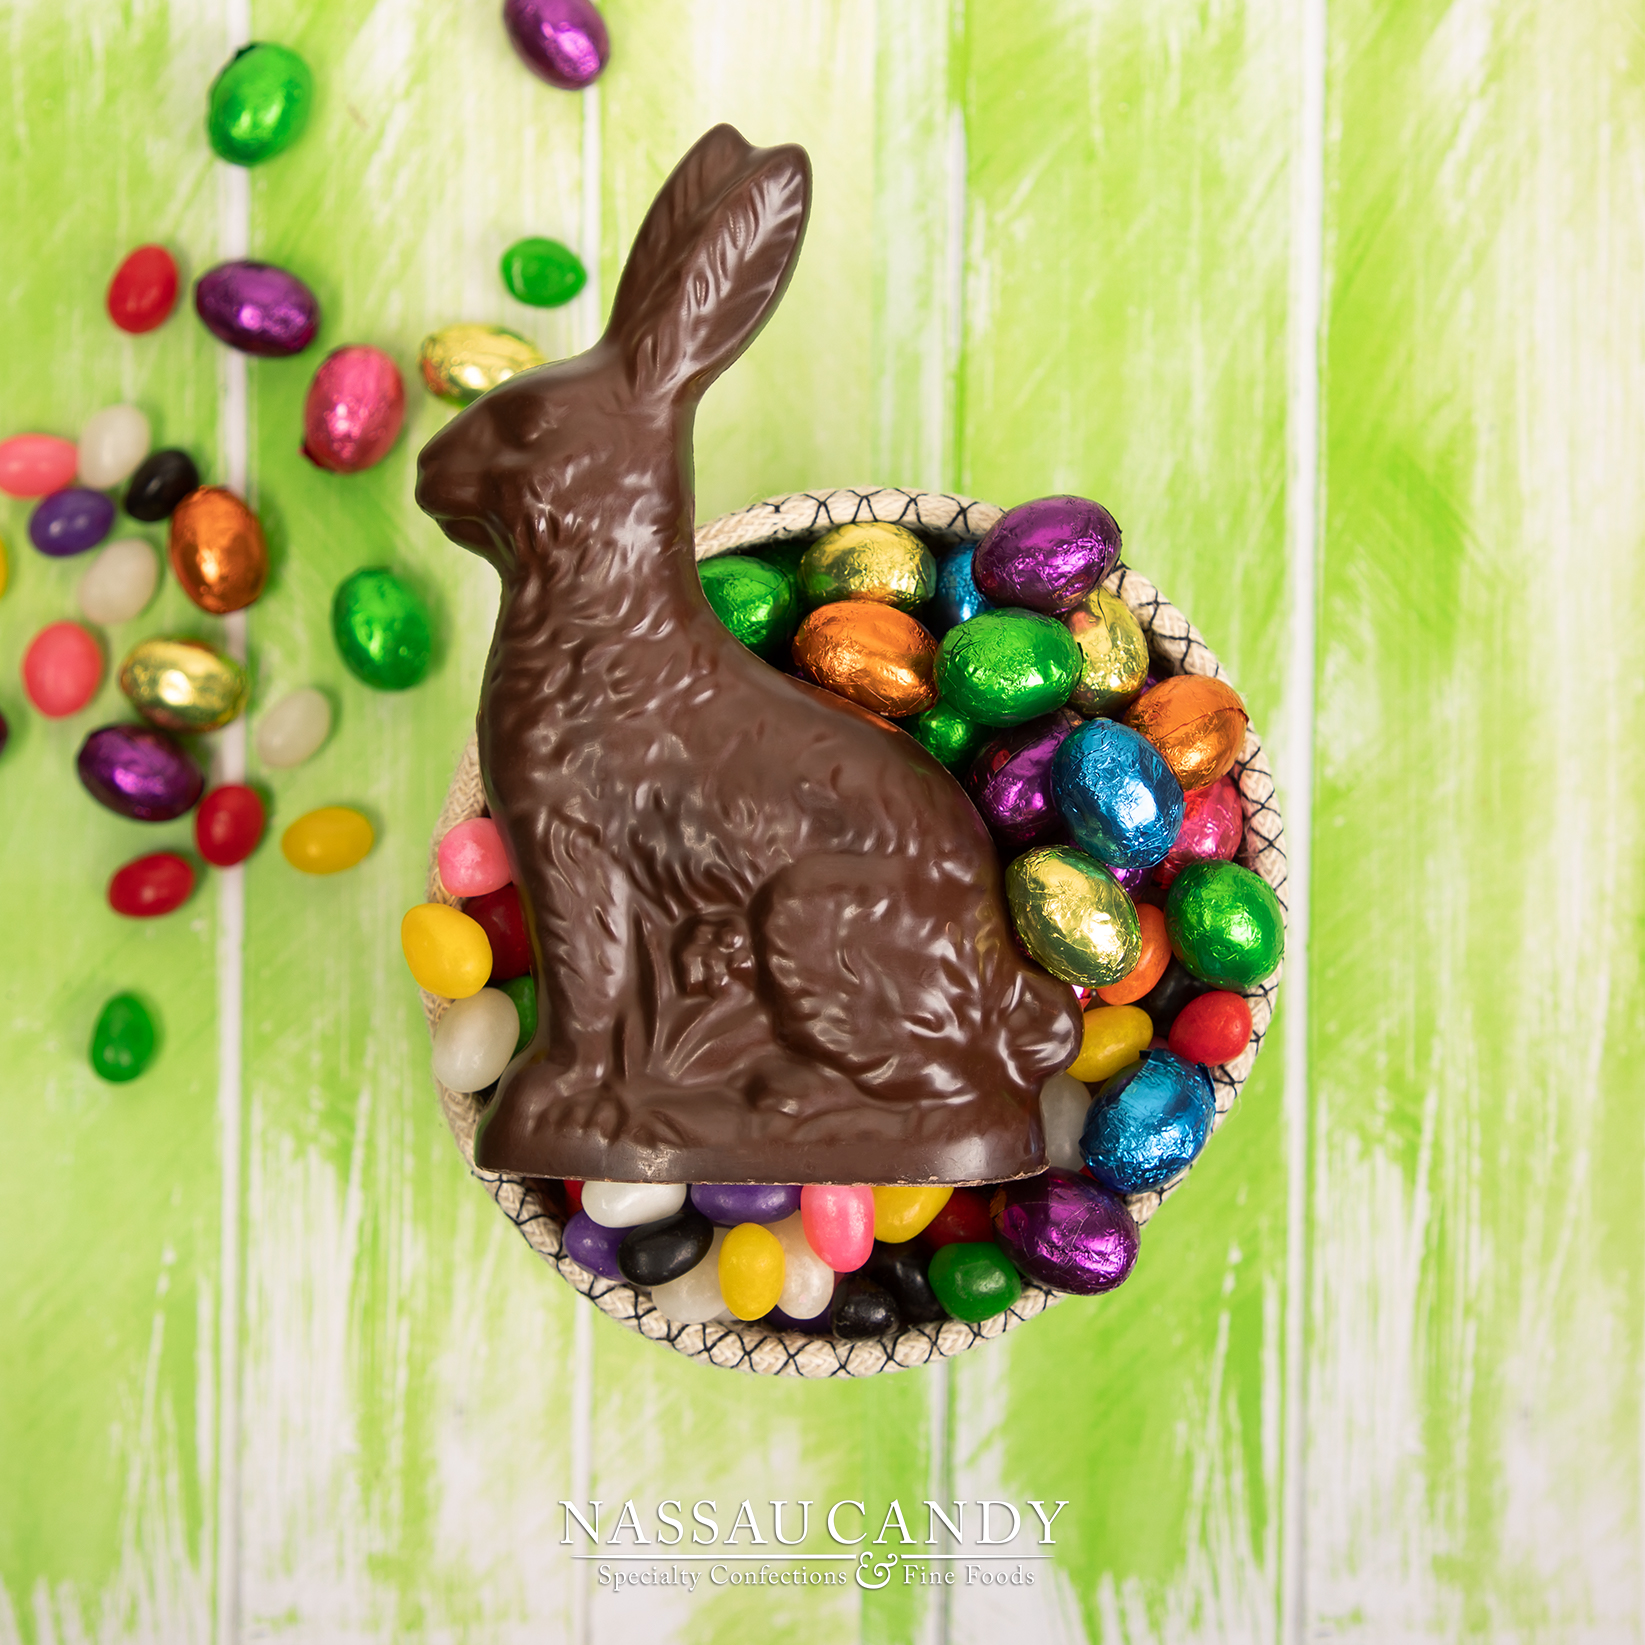 Traditions Behind the Easter Classics Every-Bunny Loves